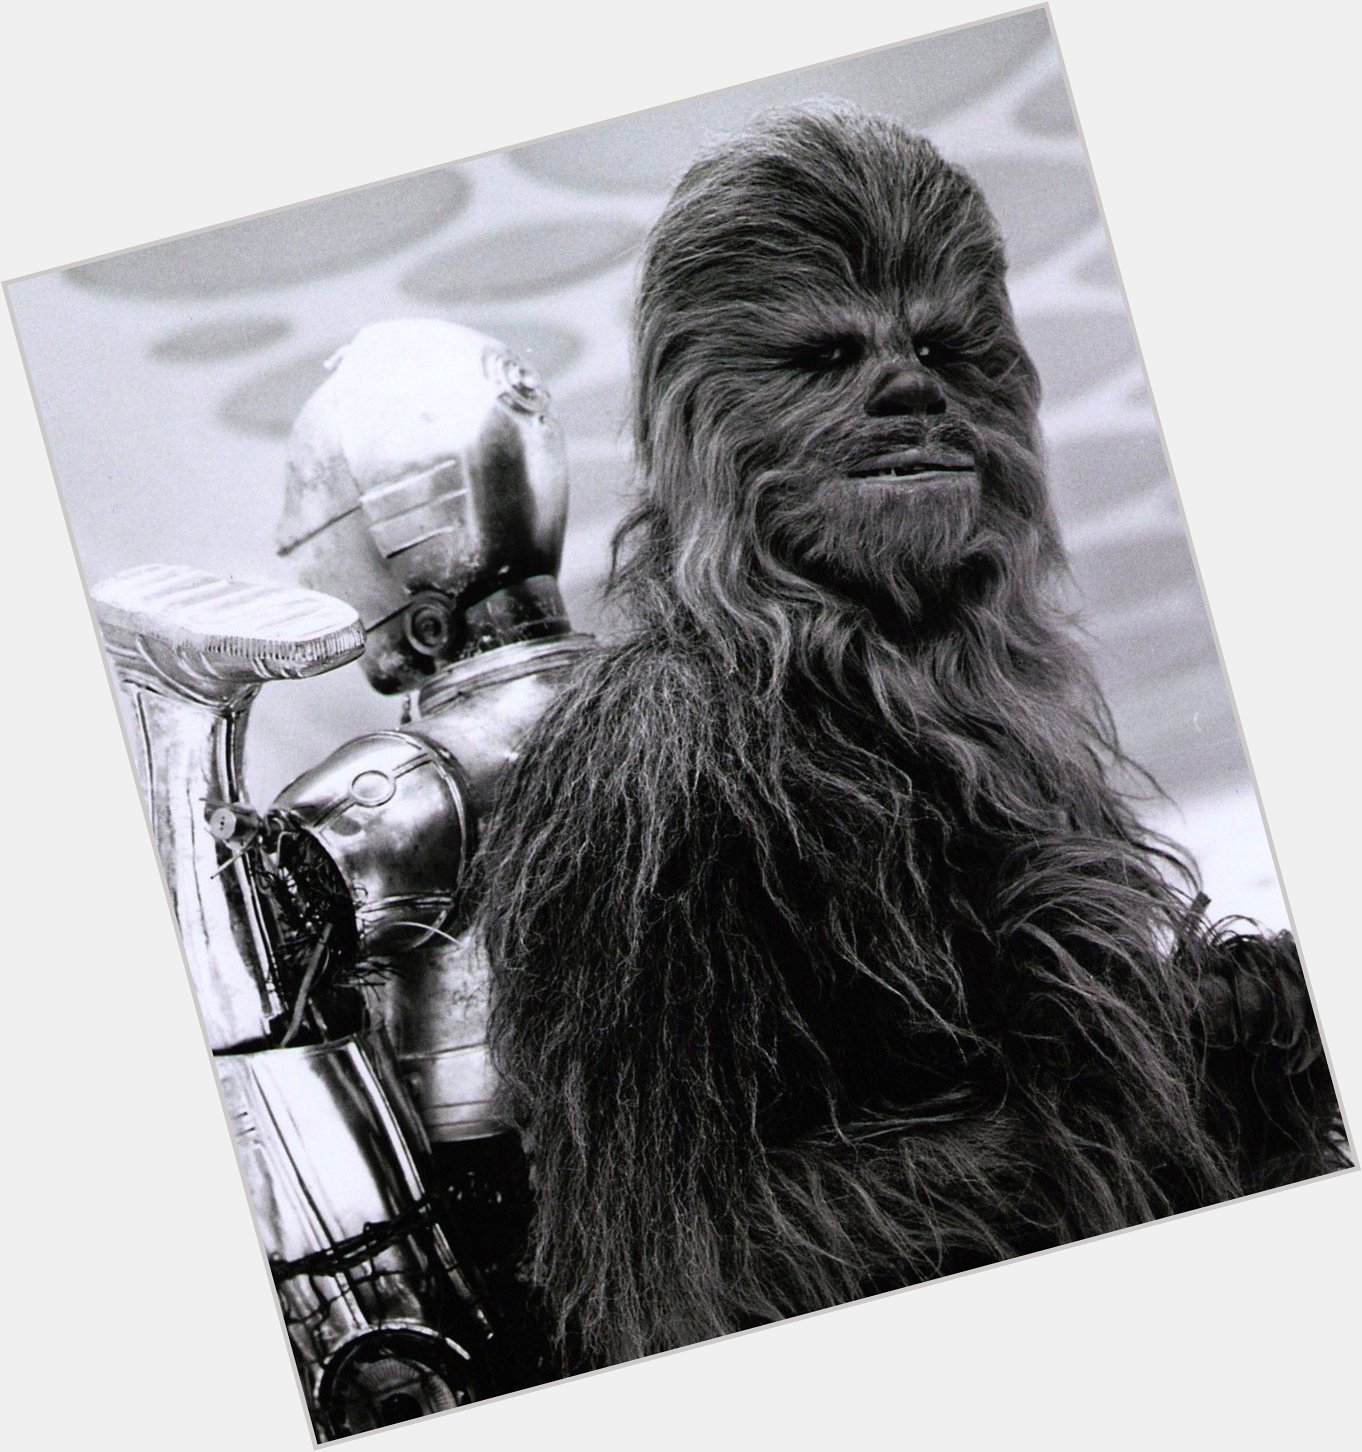 Happy birthday, Peter Mayhew, better known as Chewbacca,   